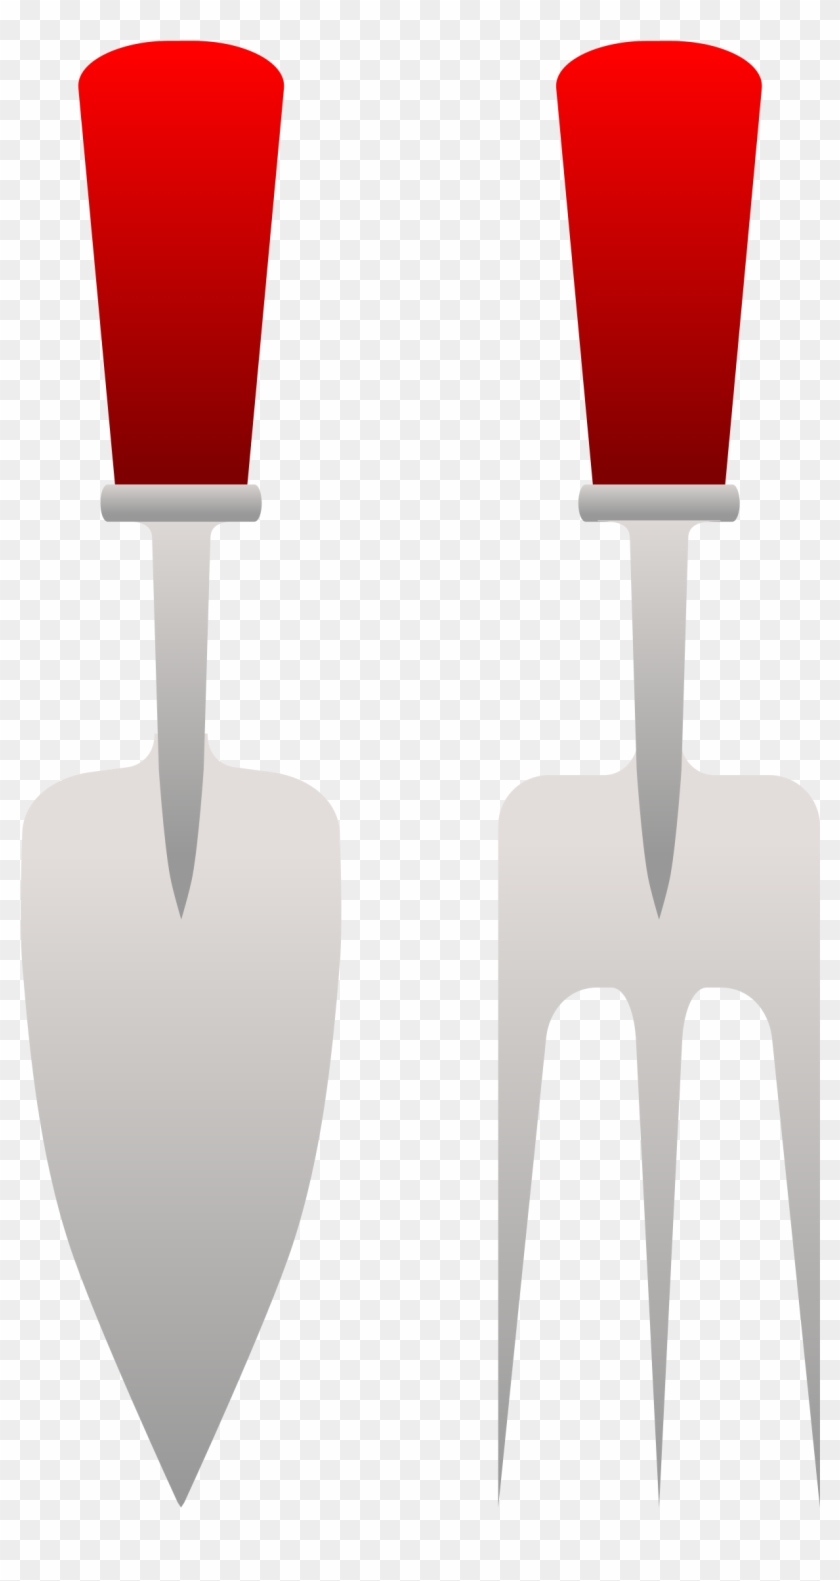 This Free Icons Png Design Of Gardening Fork And Trowel Clipart #1822284